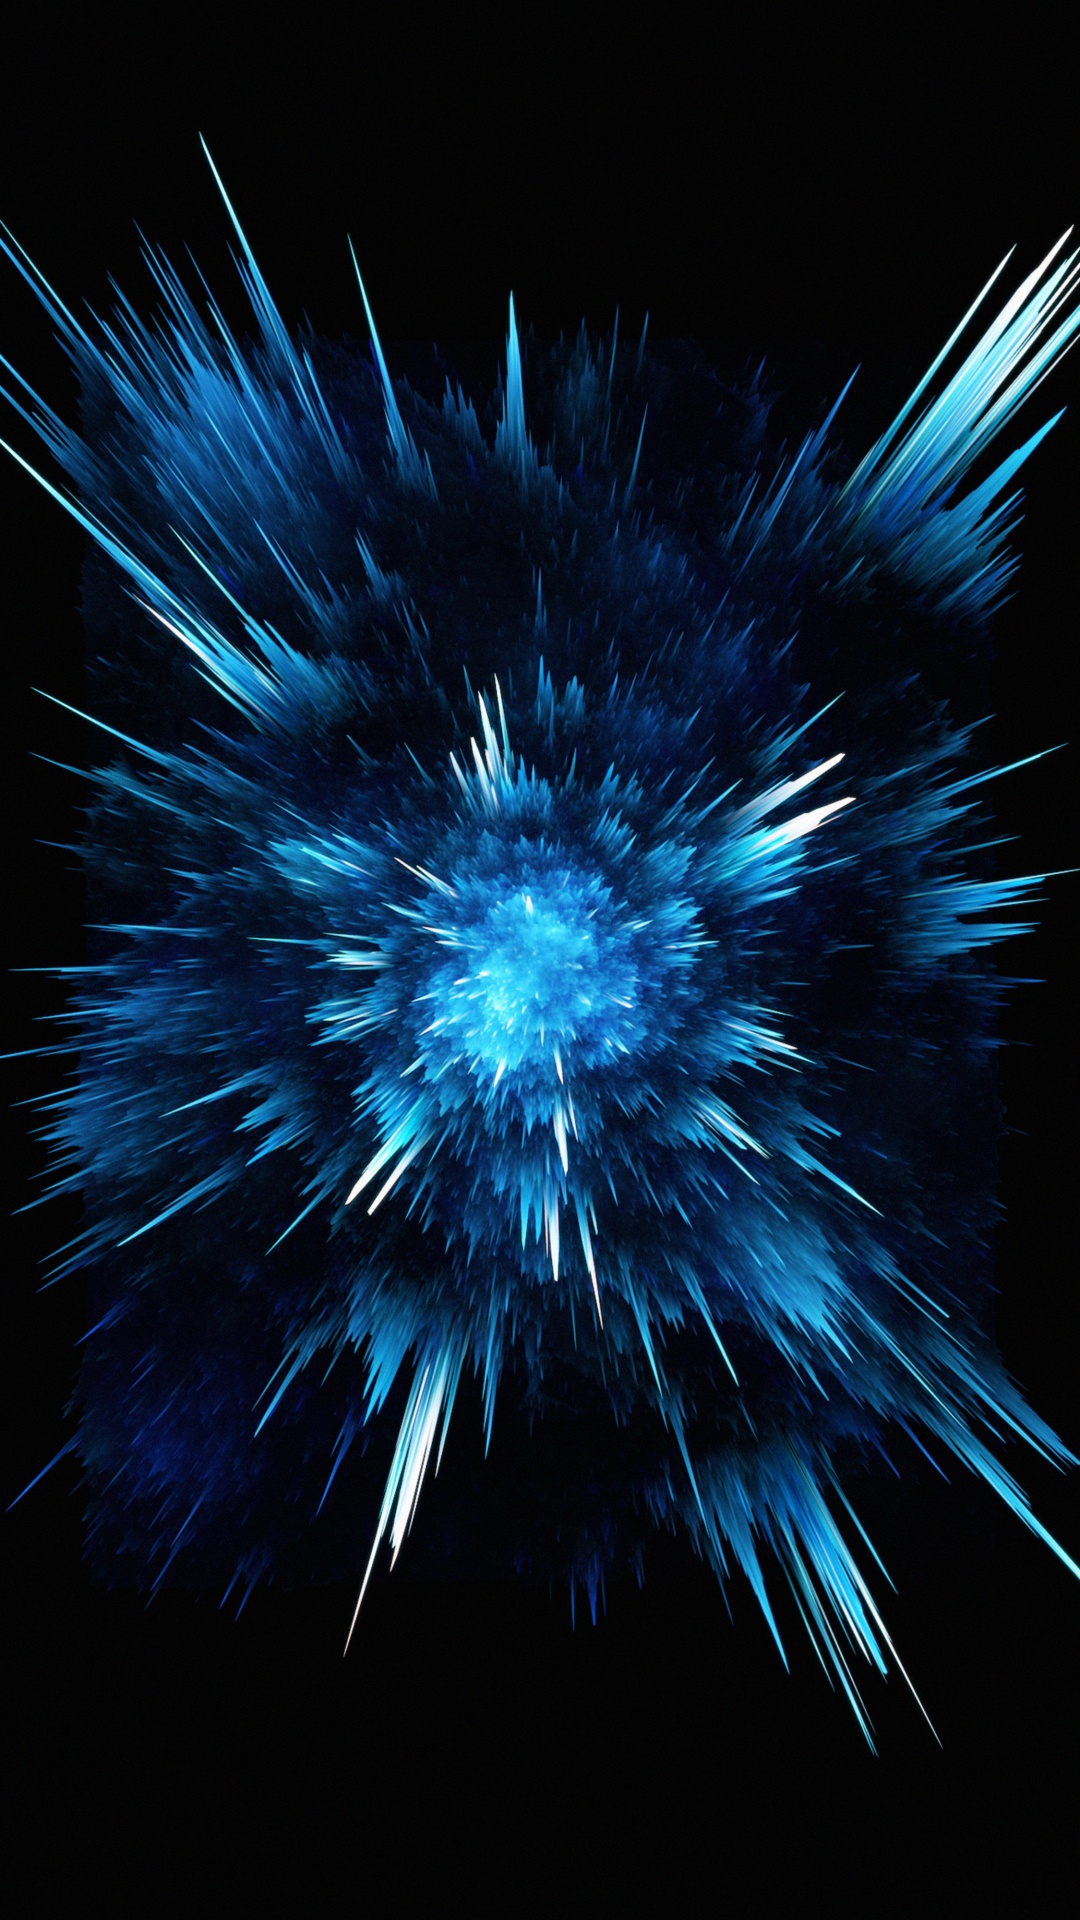 Blue and White Light on Black Background. Wallpaper in 1080x1920 Resolution